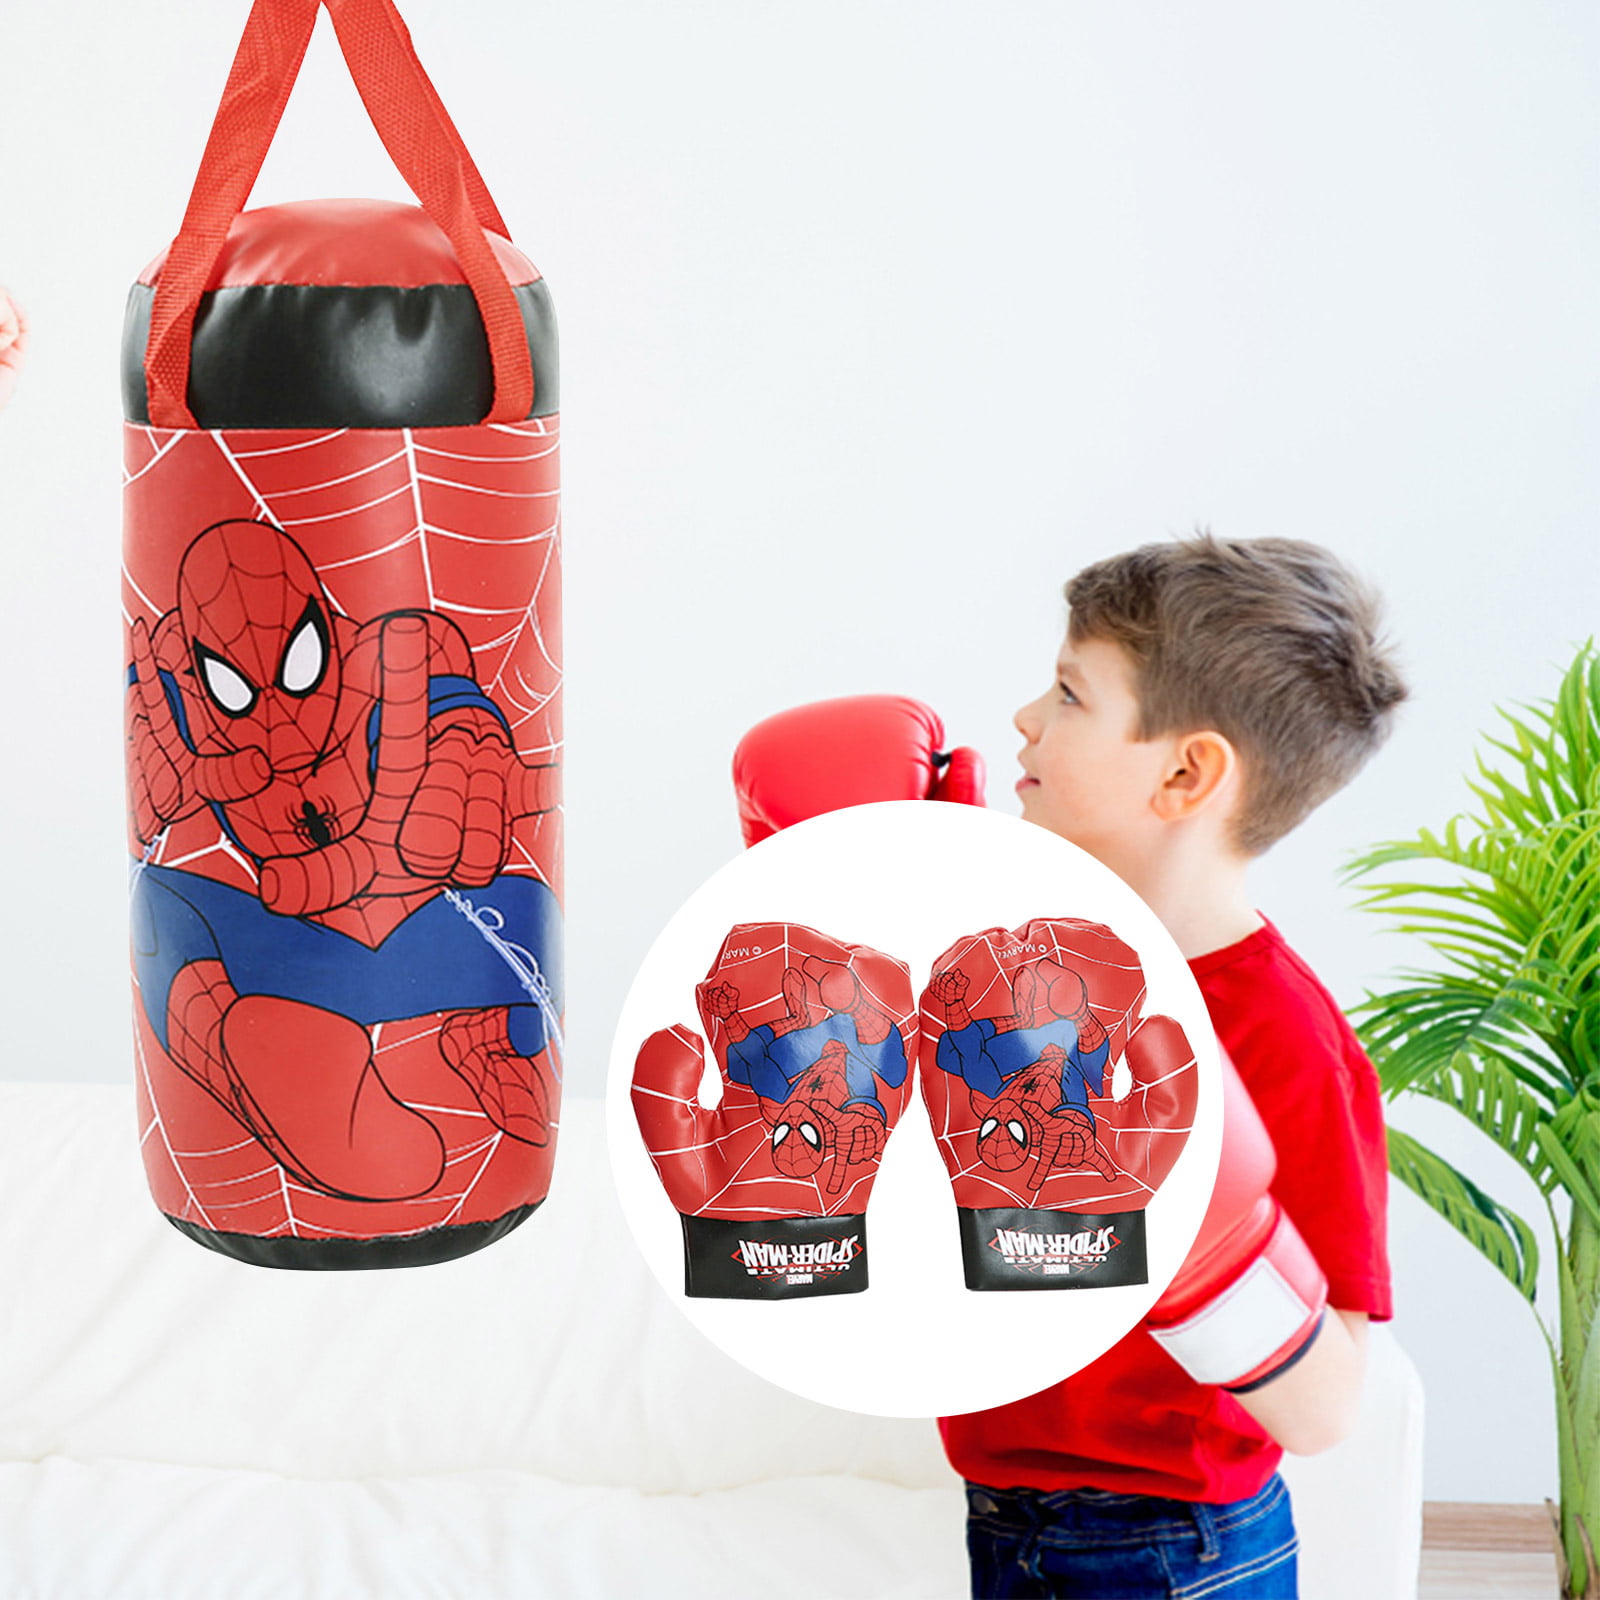 Spiderman Mini Punching Bag and Boxing Gloves for kids Toy Birthday gift 